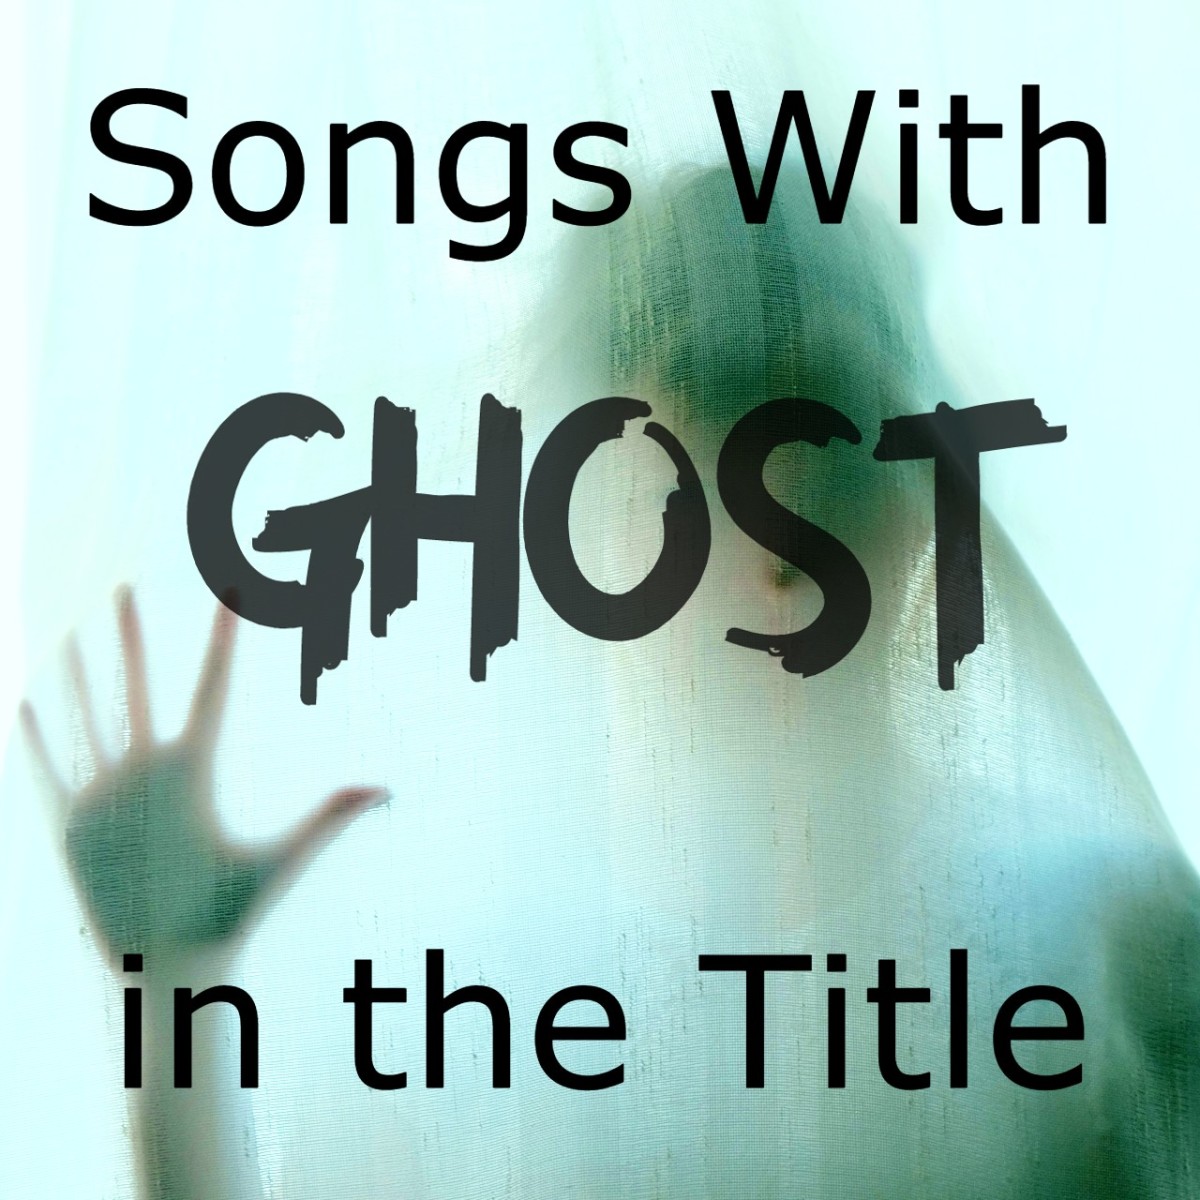 Where there are feelings of emptiness and sorrow and sad twists of fate, there are often images of ghosts in music. Make a playlist of pop, rock, country, and R&B songs with ghost in the title.